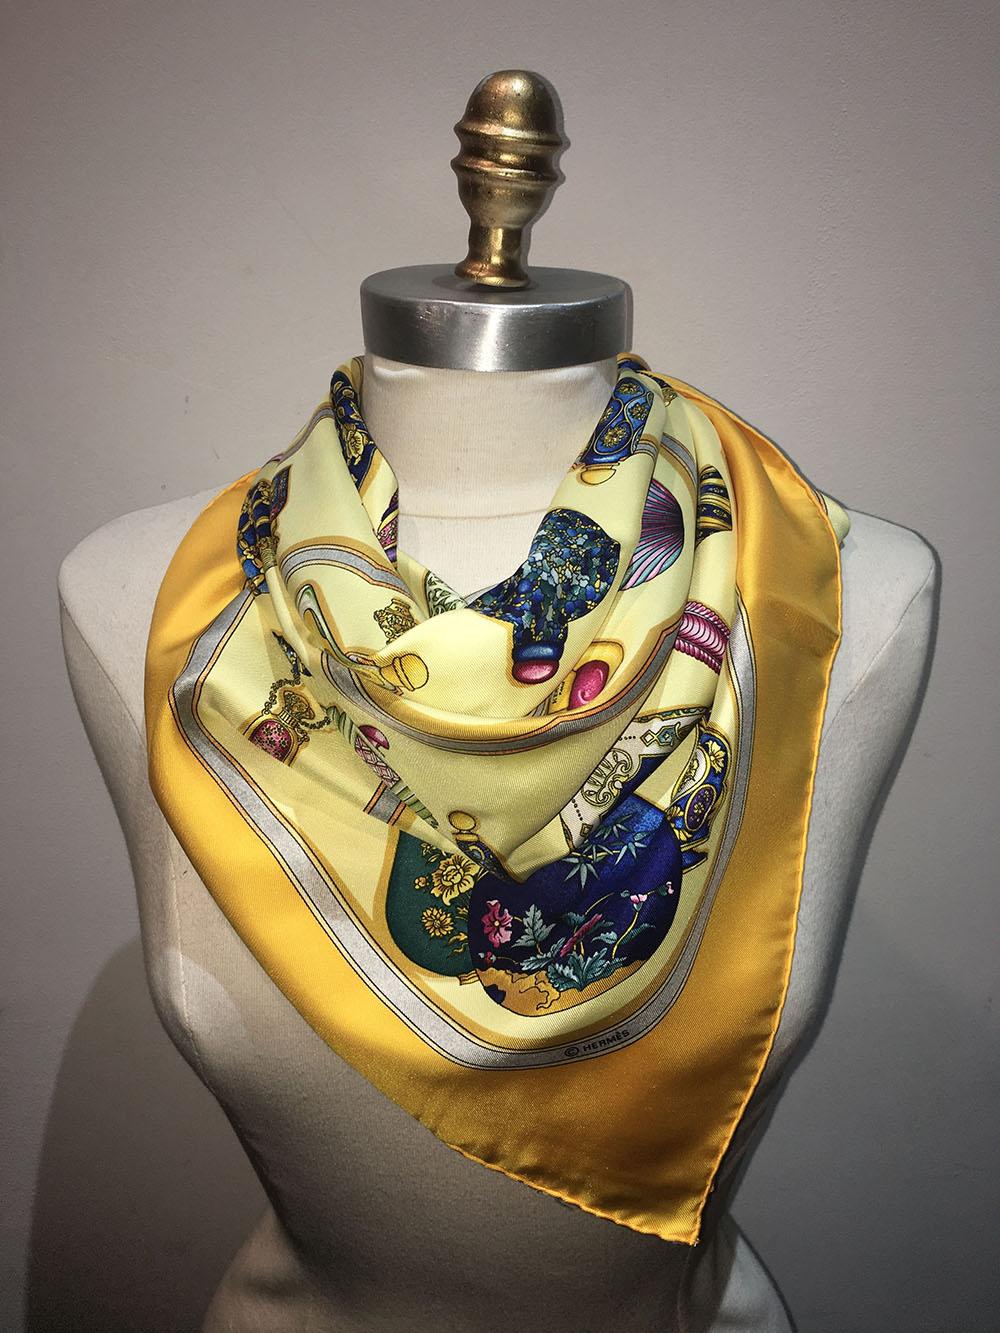 AUTHENTIC HERMES silk Qu'Import le Flacon silk scarf in excellent condition. Original silk screen design c1988 by Catherine Baschet features an array of perfume bottles over a pale yellow background surrounded by a dark yellow border. This piece is